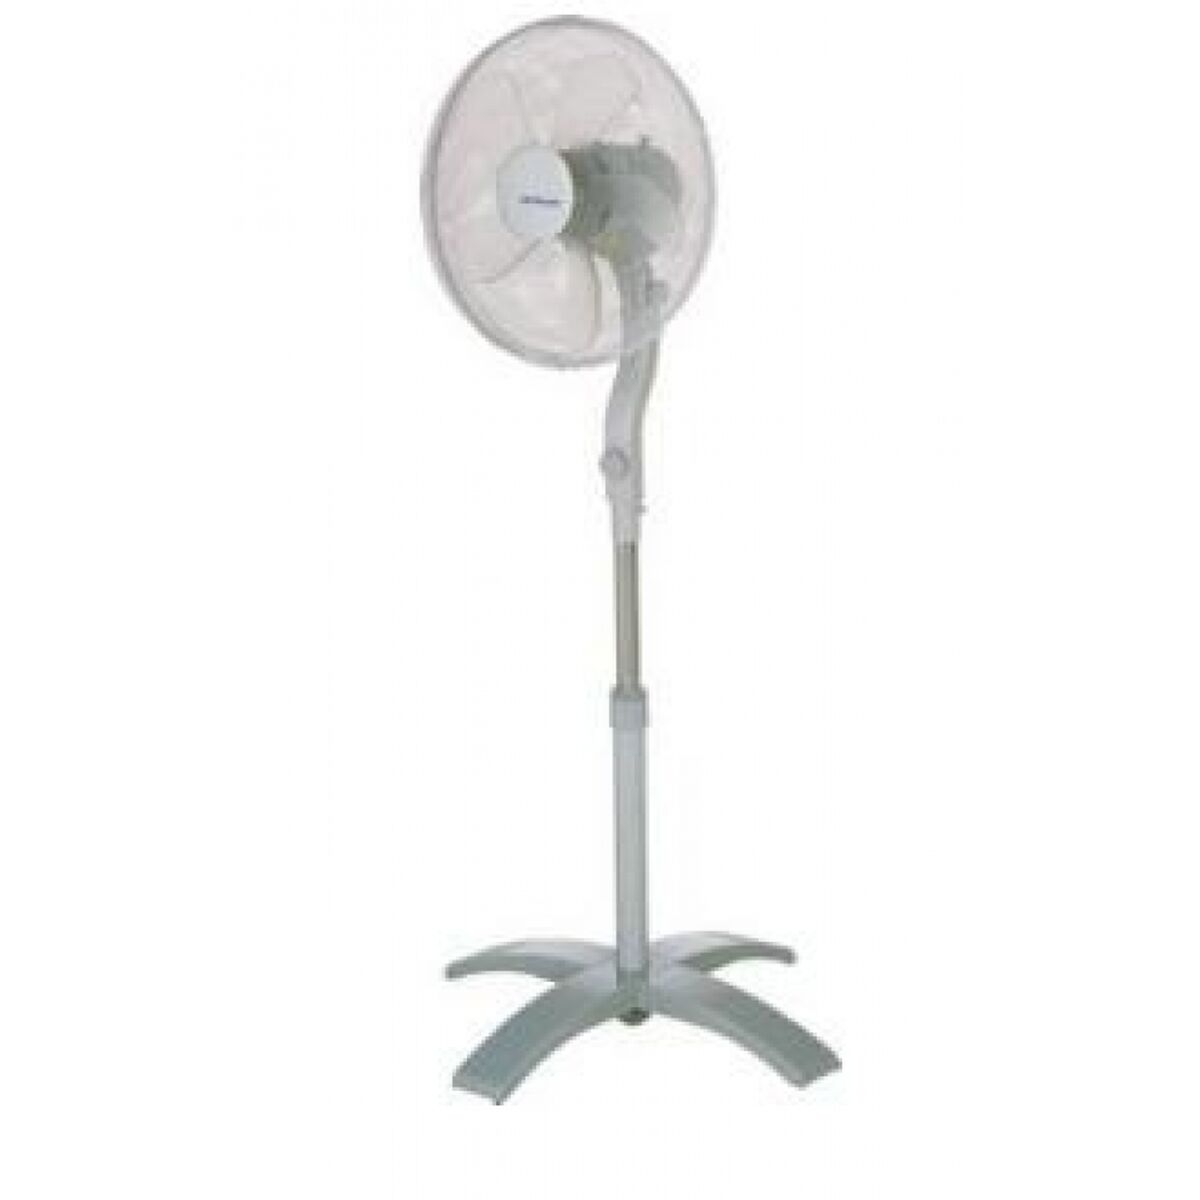 Freestanding Fan Orbegozo SF 0440 White 60 W, Orbegozo, Home and cooking, Portable air conditioning, freestanding-fan-orbegozo-sf-0440-white-60-w, Brand_Orbegozo, category-reference-2399, category-reference-2450, category-reference-2451, category-reference-t-19656, category-reference-t-21087, category-reference-t-25217, Condition_NEW, ferretería, Price_50 - 100, summer, RiotNook